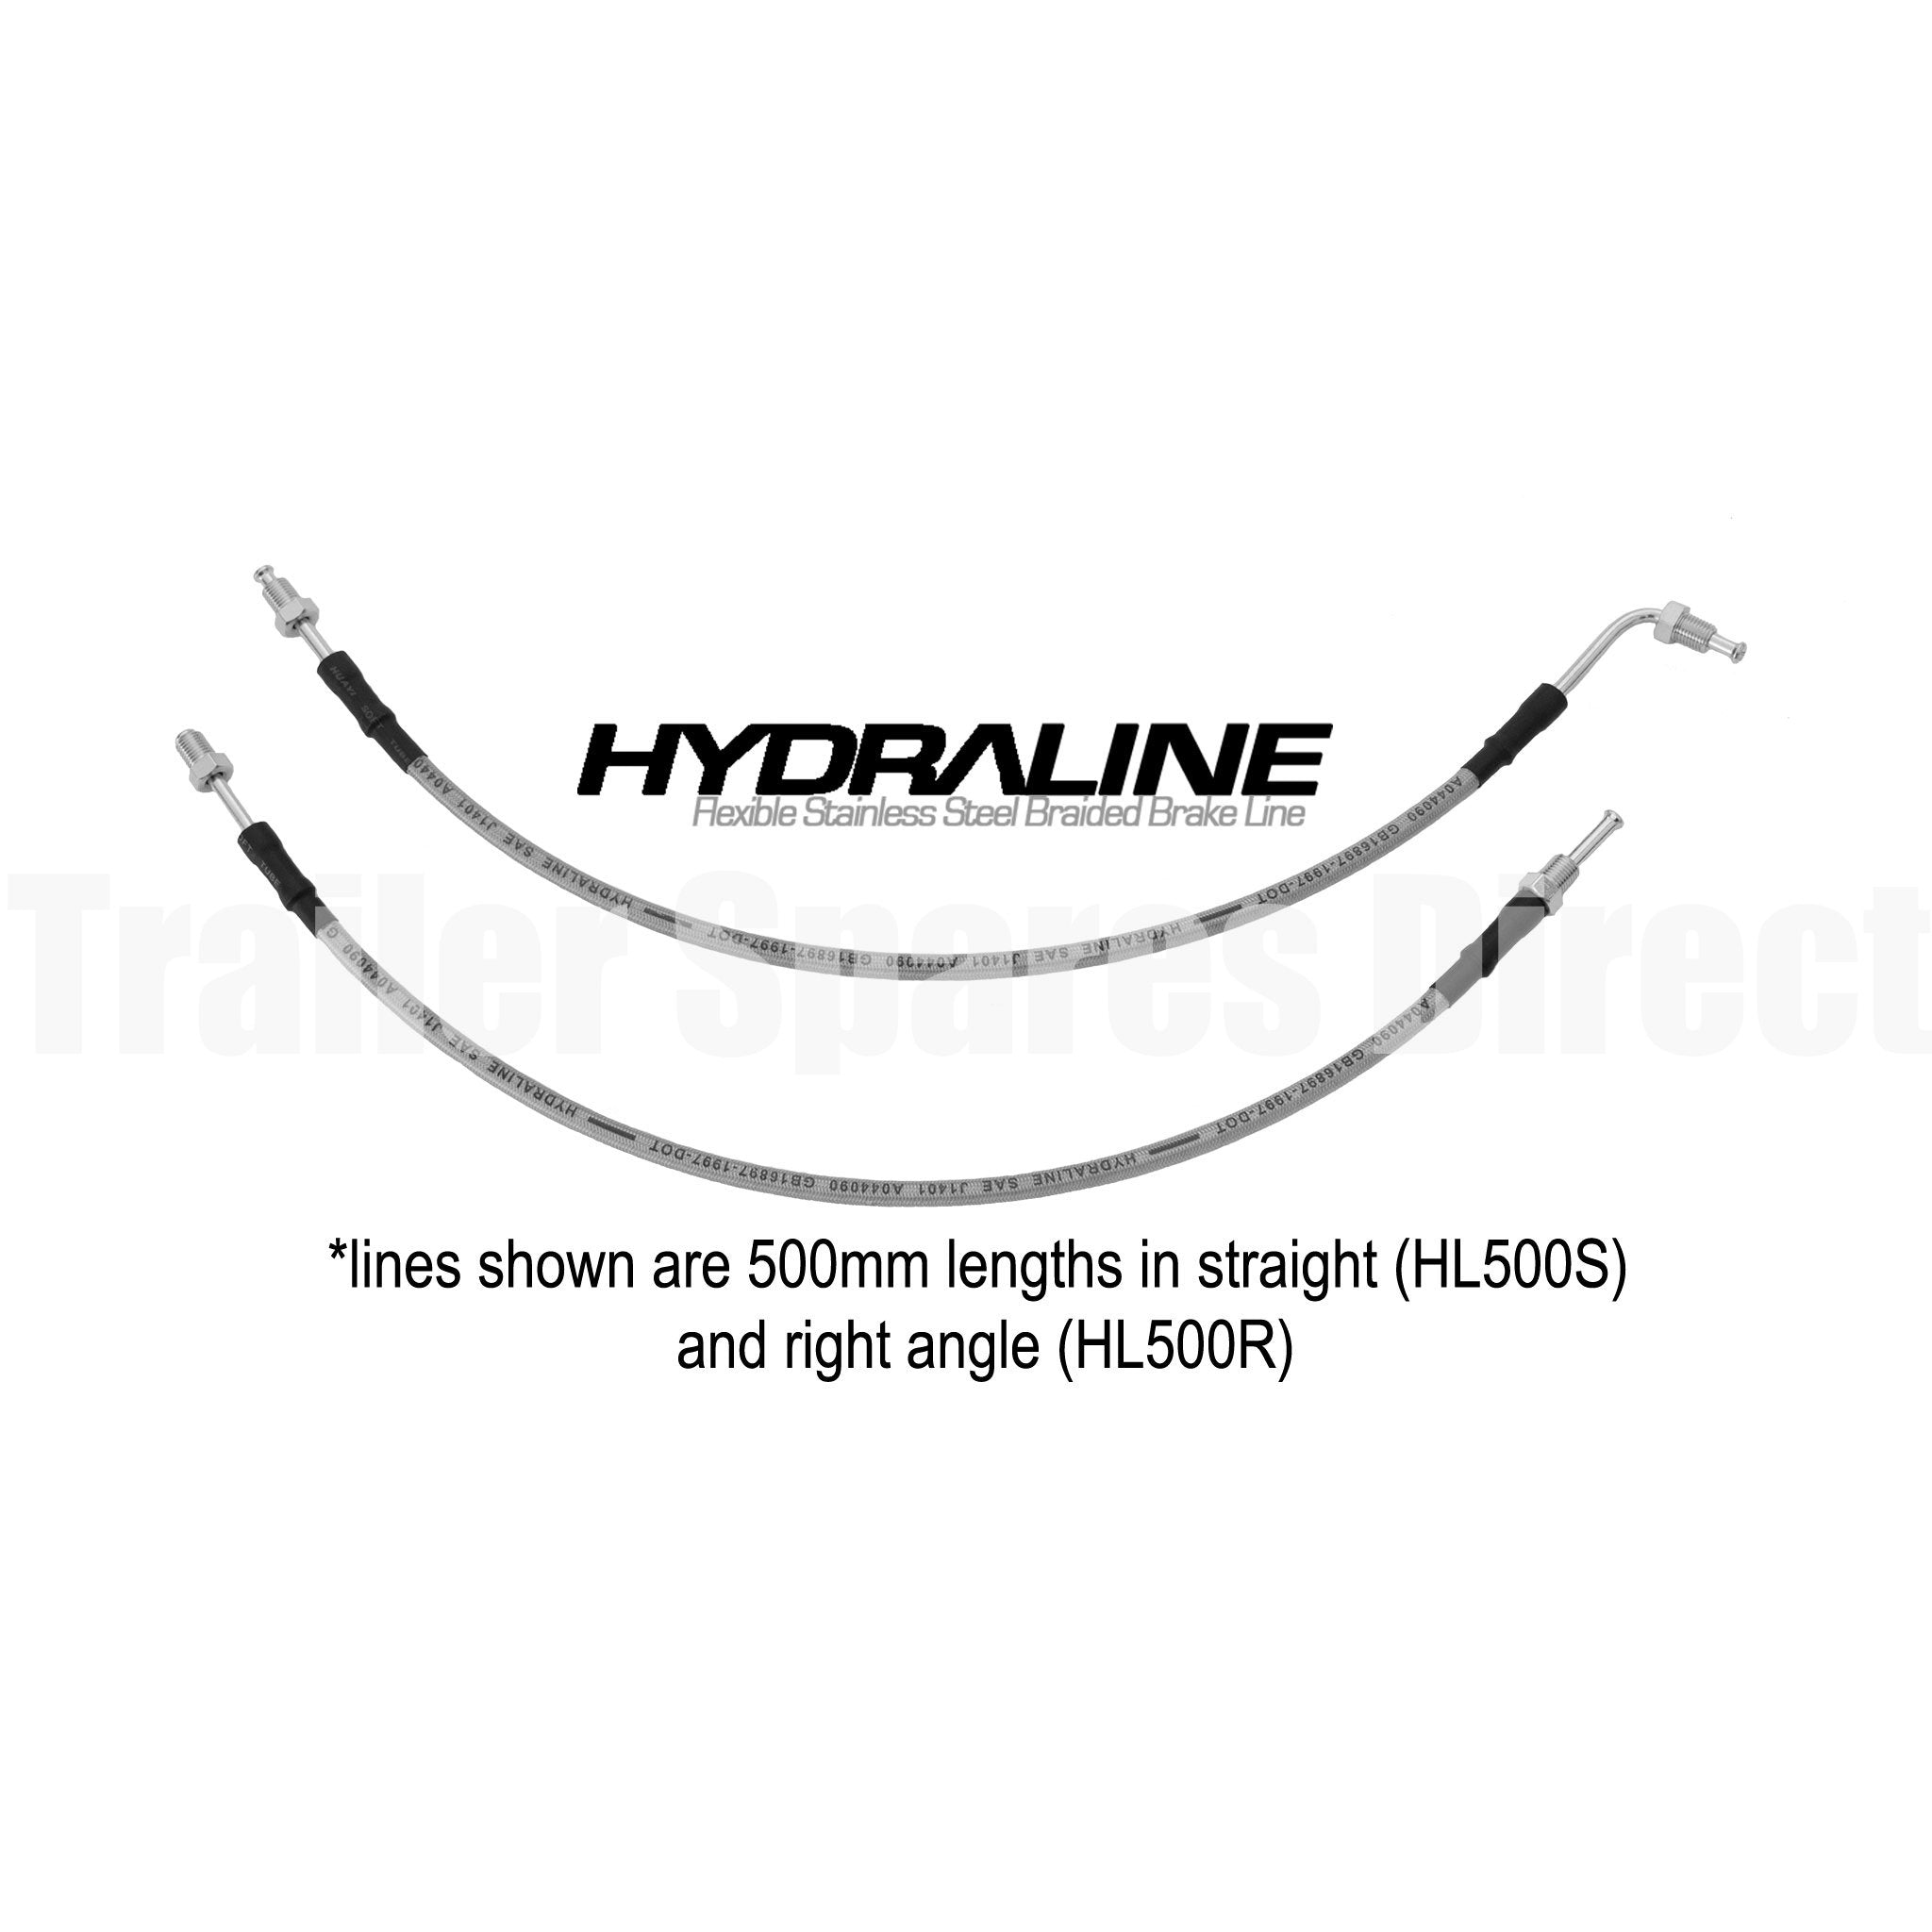 Tri-axle HydraLine kit with 5500mm lead line